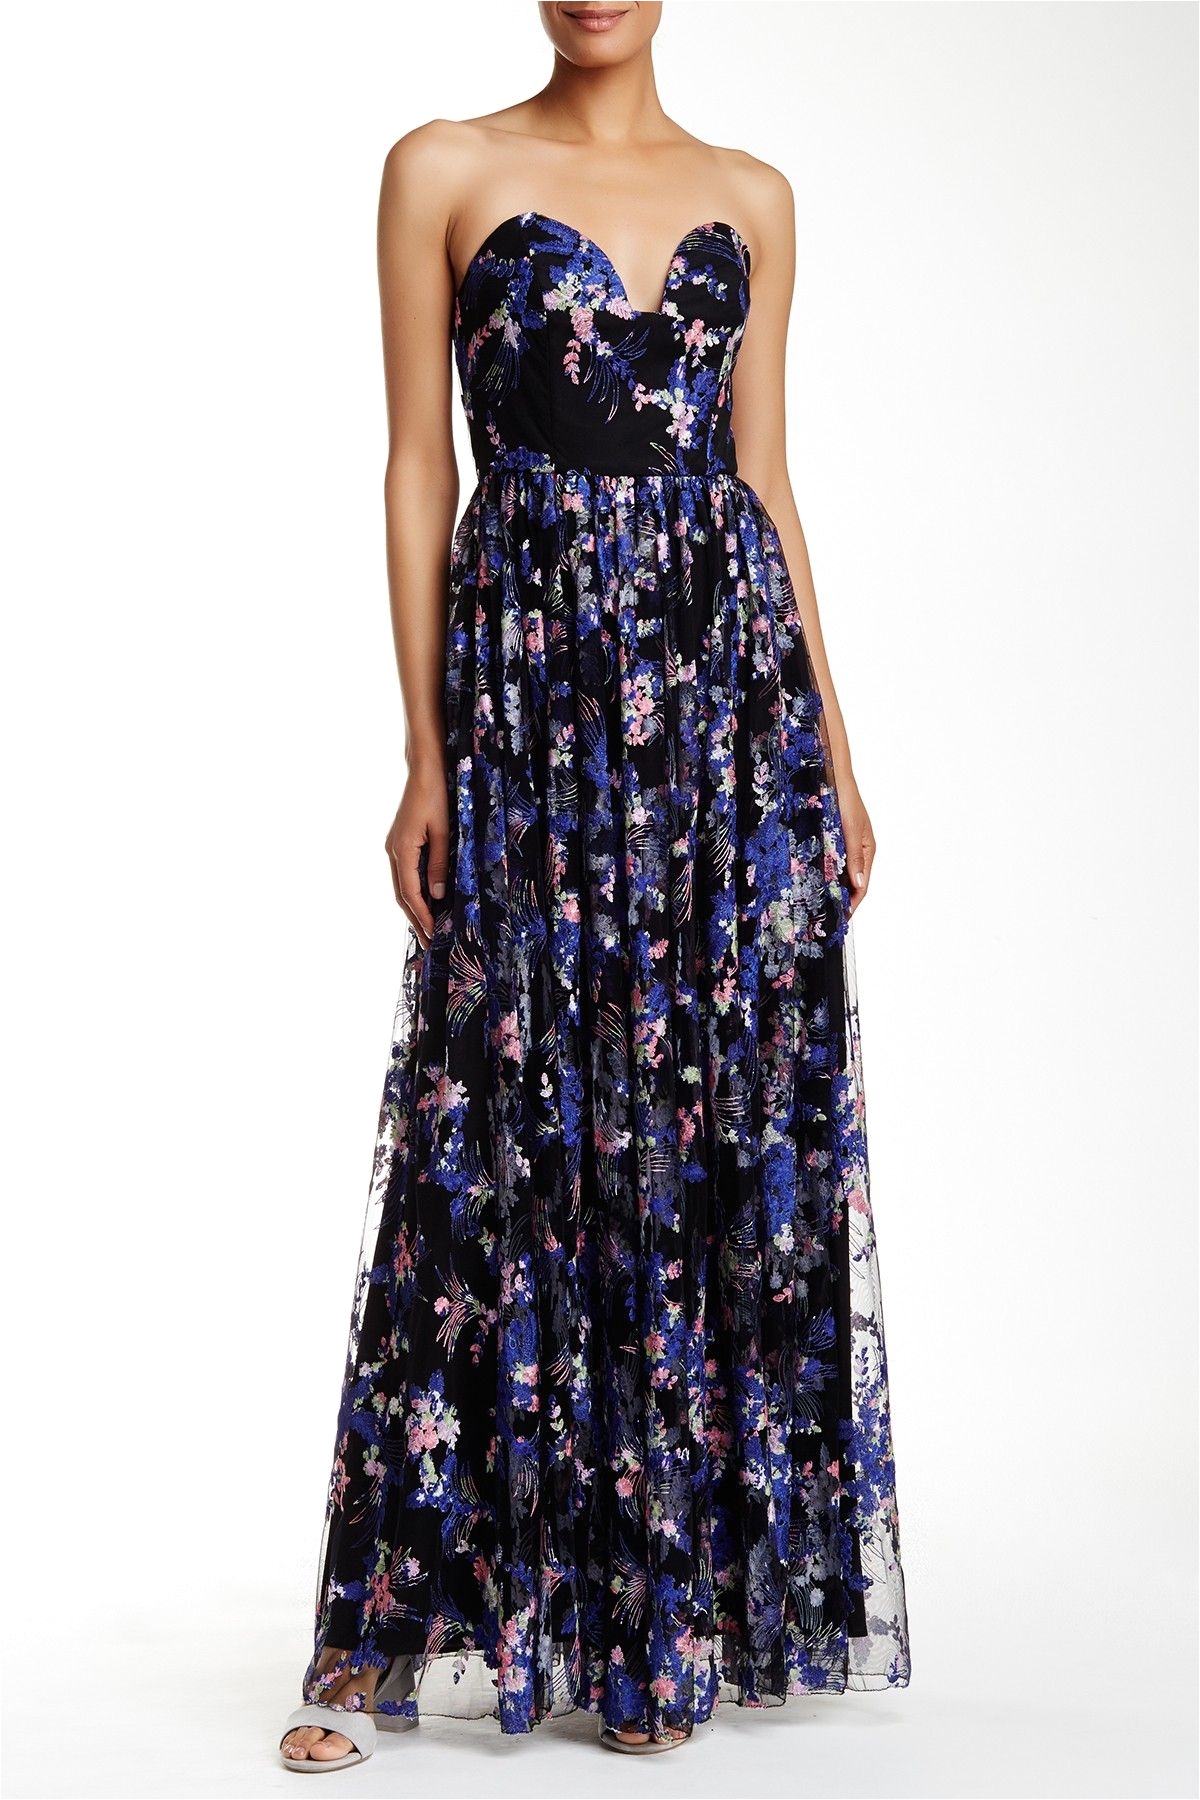 nicole miller pointed strapless gown at nordstrom rack free shipping on orders over 100